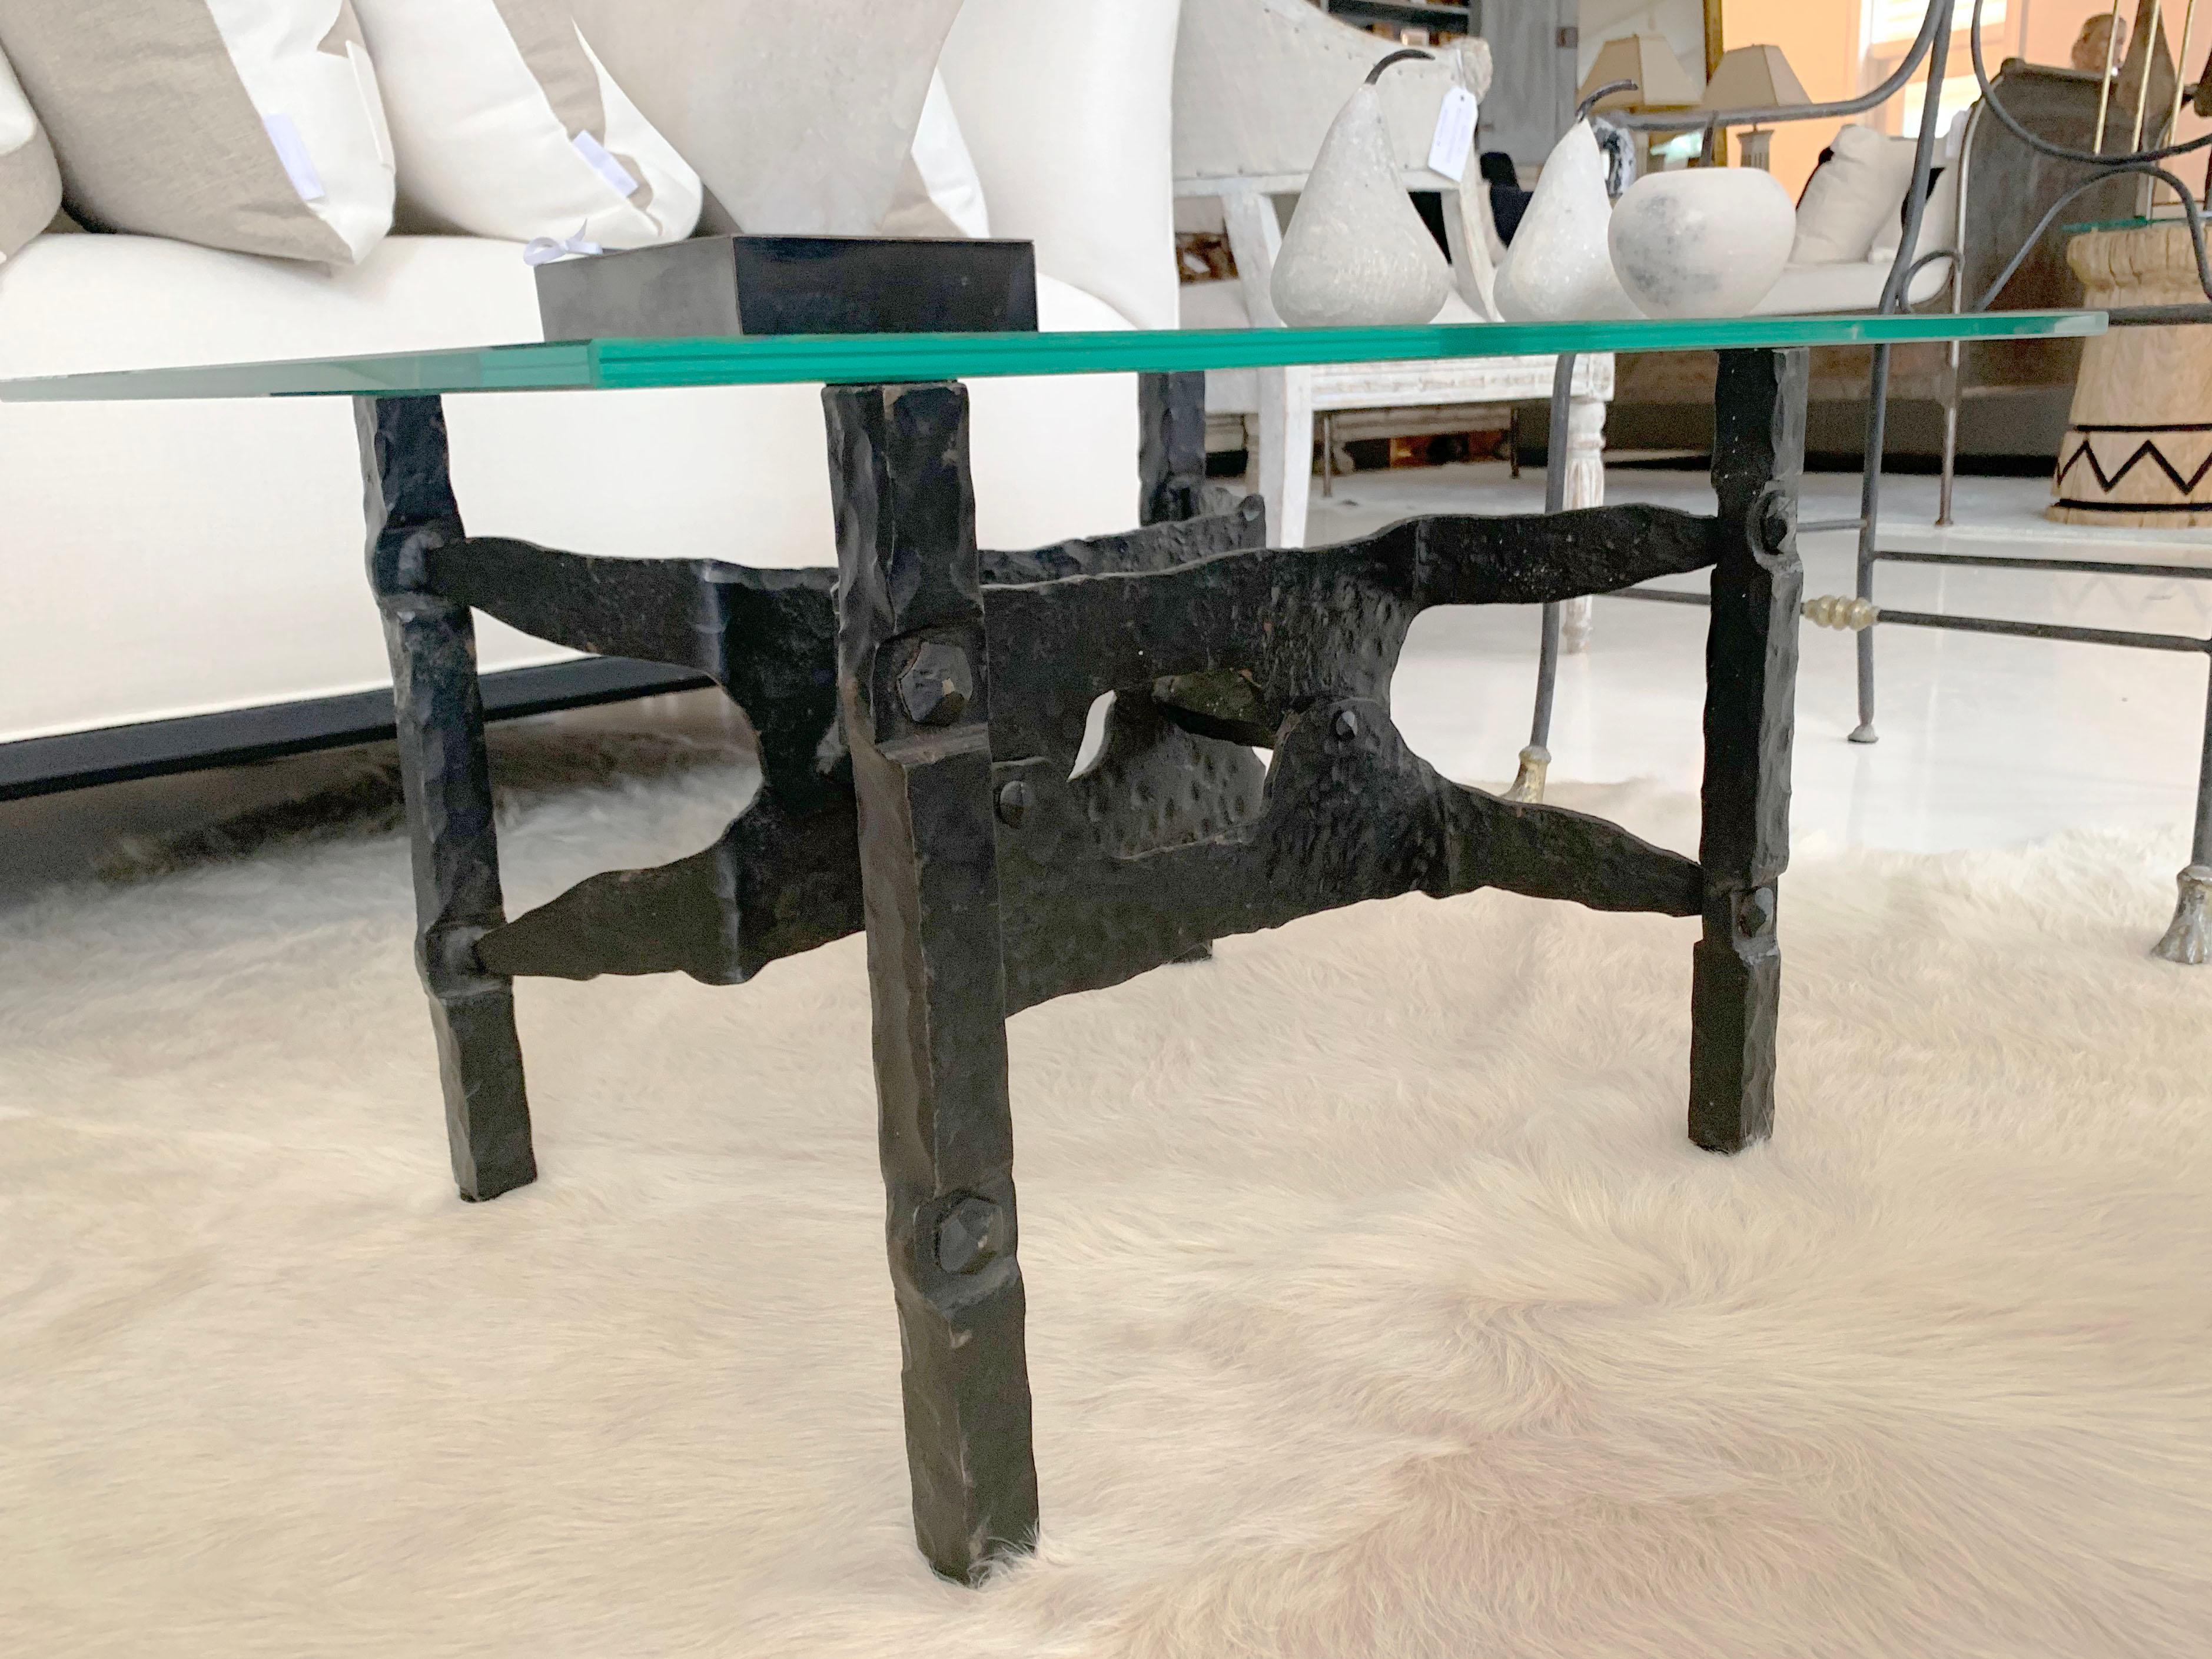 Brutalist European glass top coffee table with sculpted bronze base - Purchased in Europe, similar to Paul Evans. Very good condition, patina to metal, wear is consistent with age and light use.

 